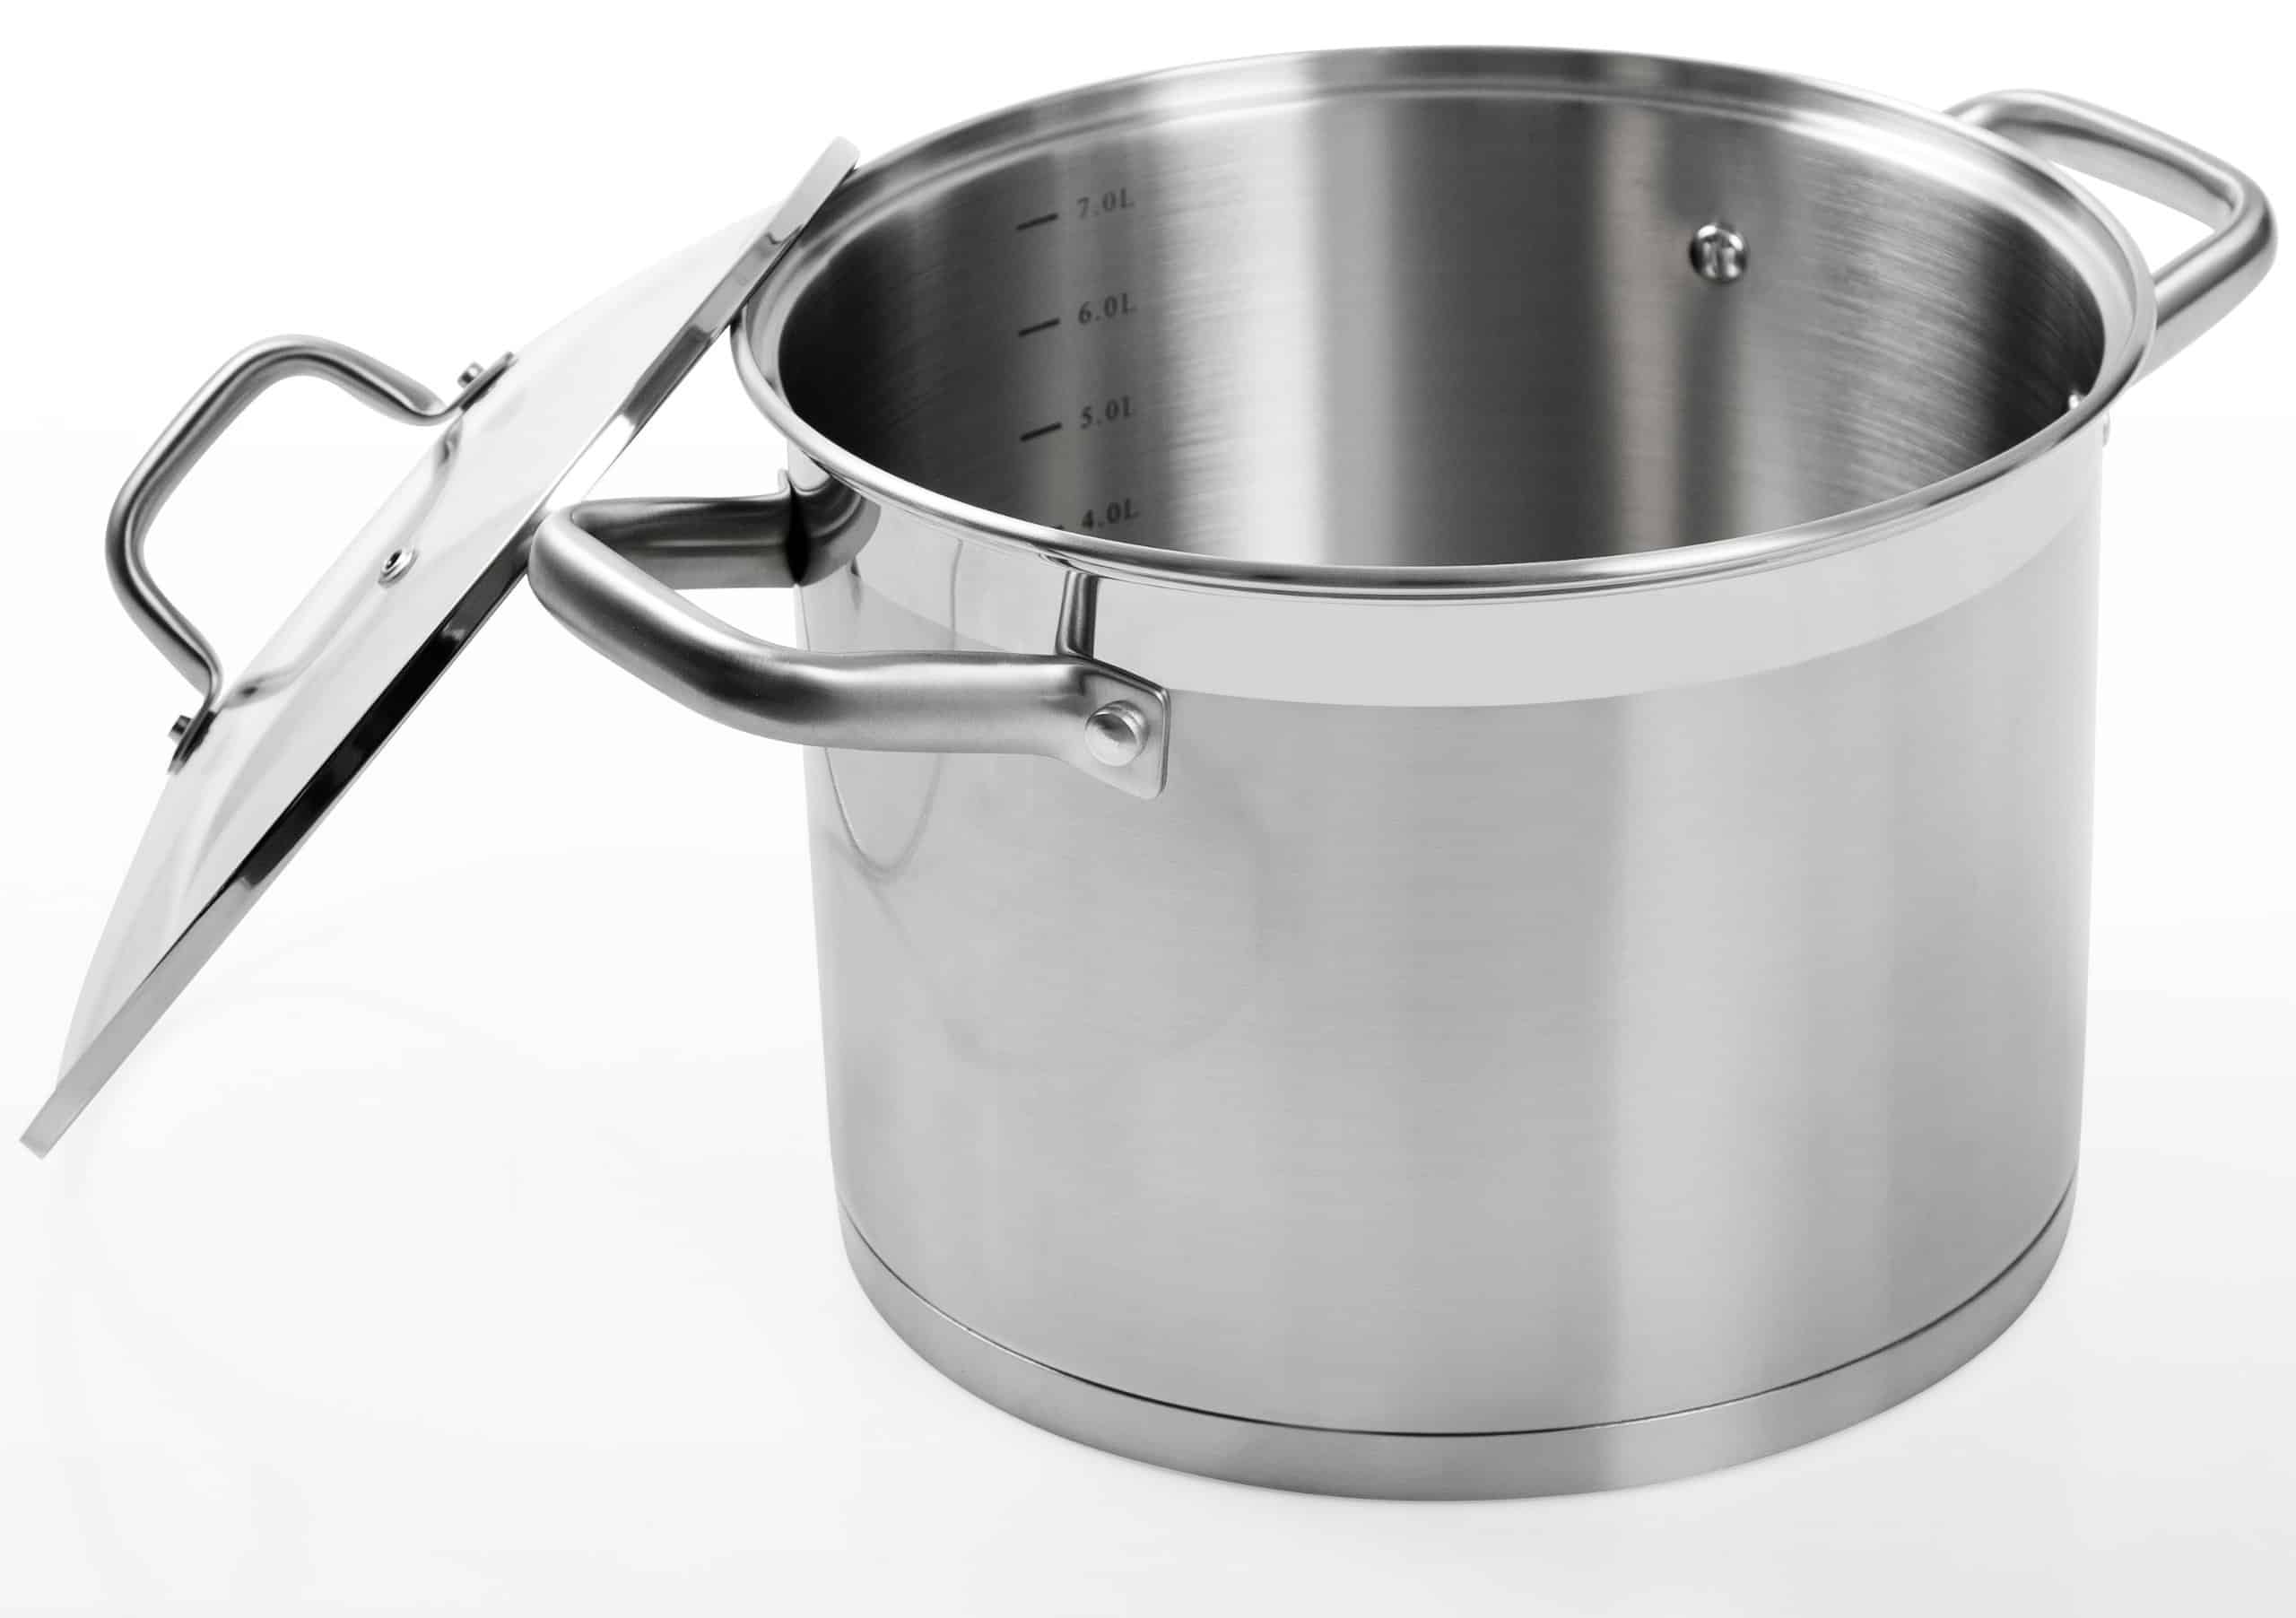 Point of difference to other stockpots. Image shows measurements inside Duxtop stock pot